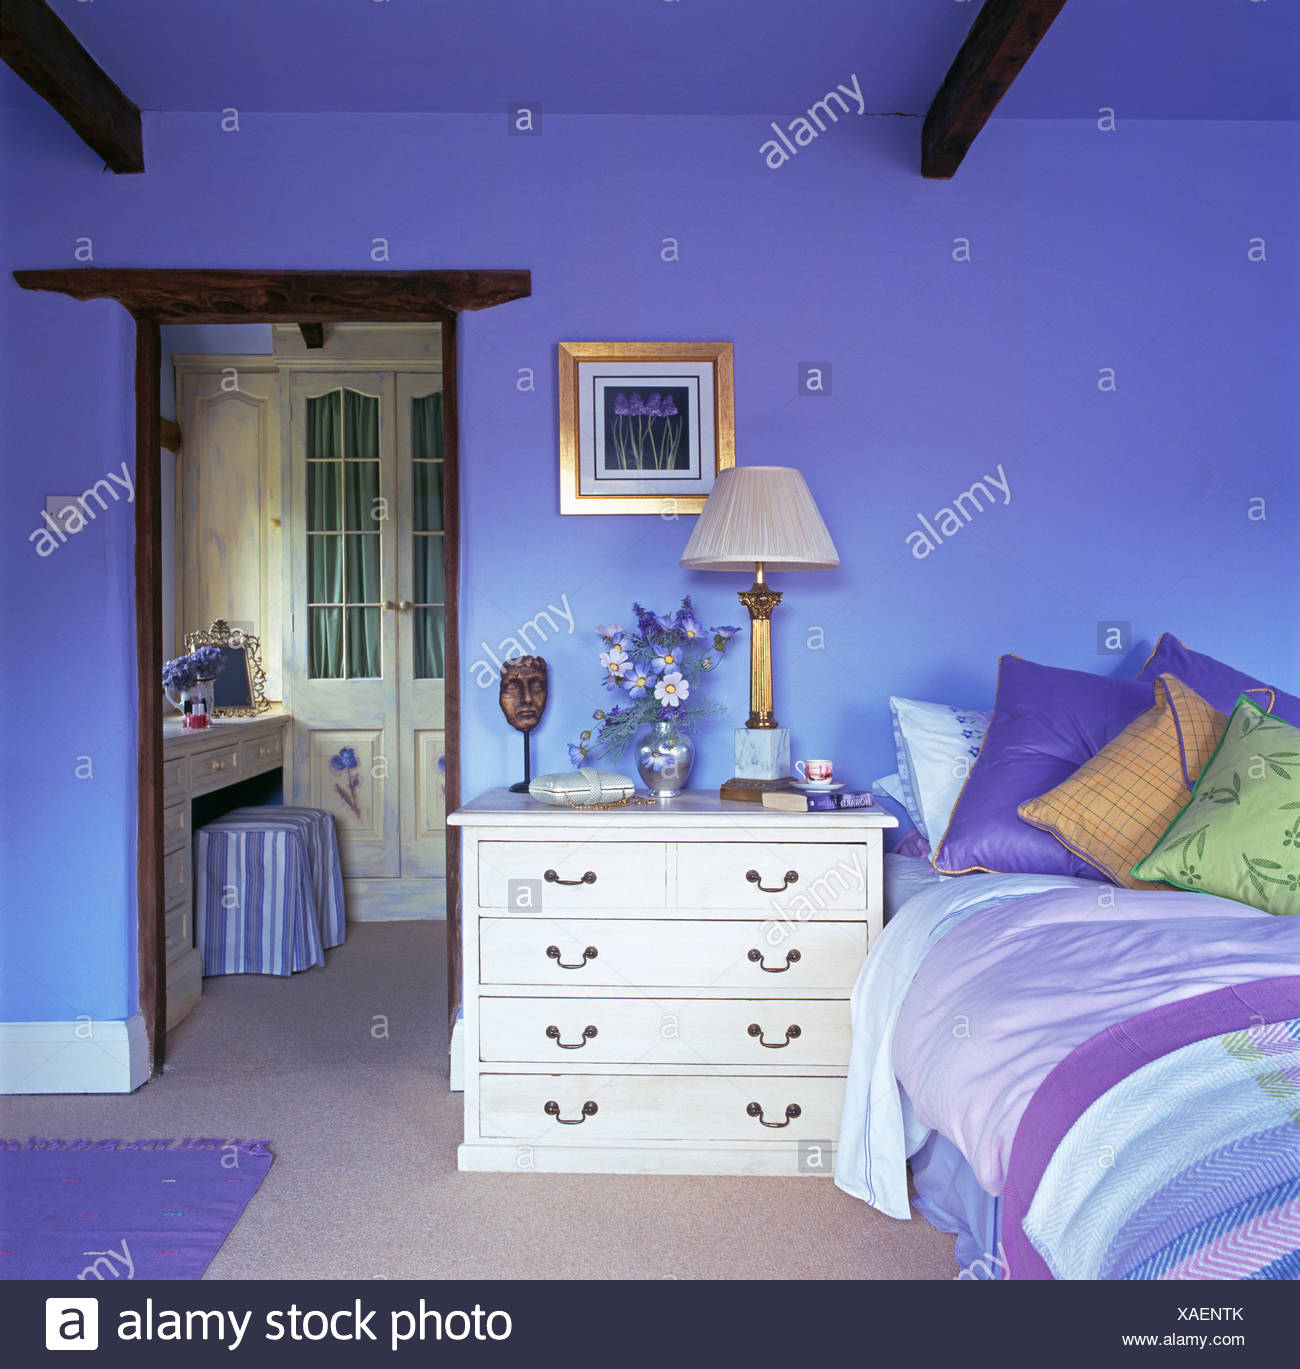 White Chest Of Drawers Beside Bed Piled With Colorful Cushions In